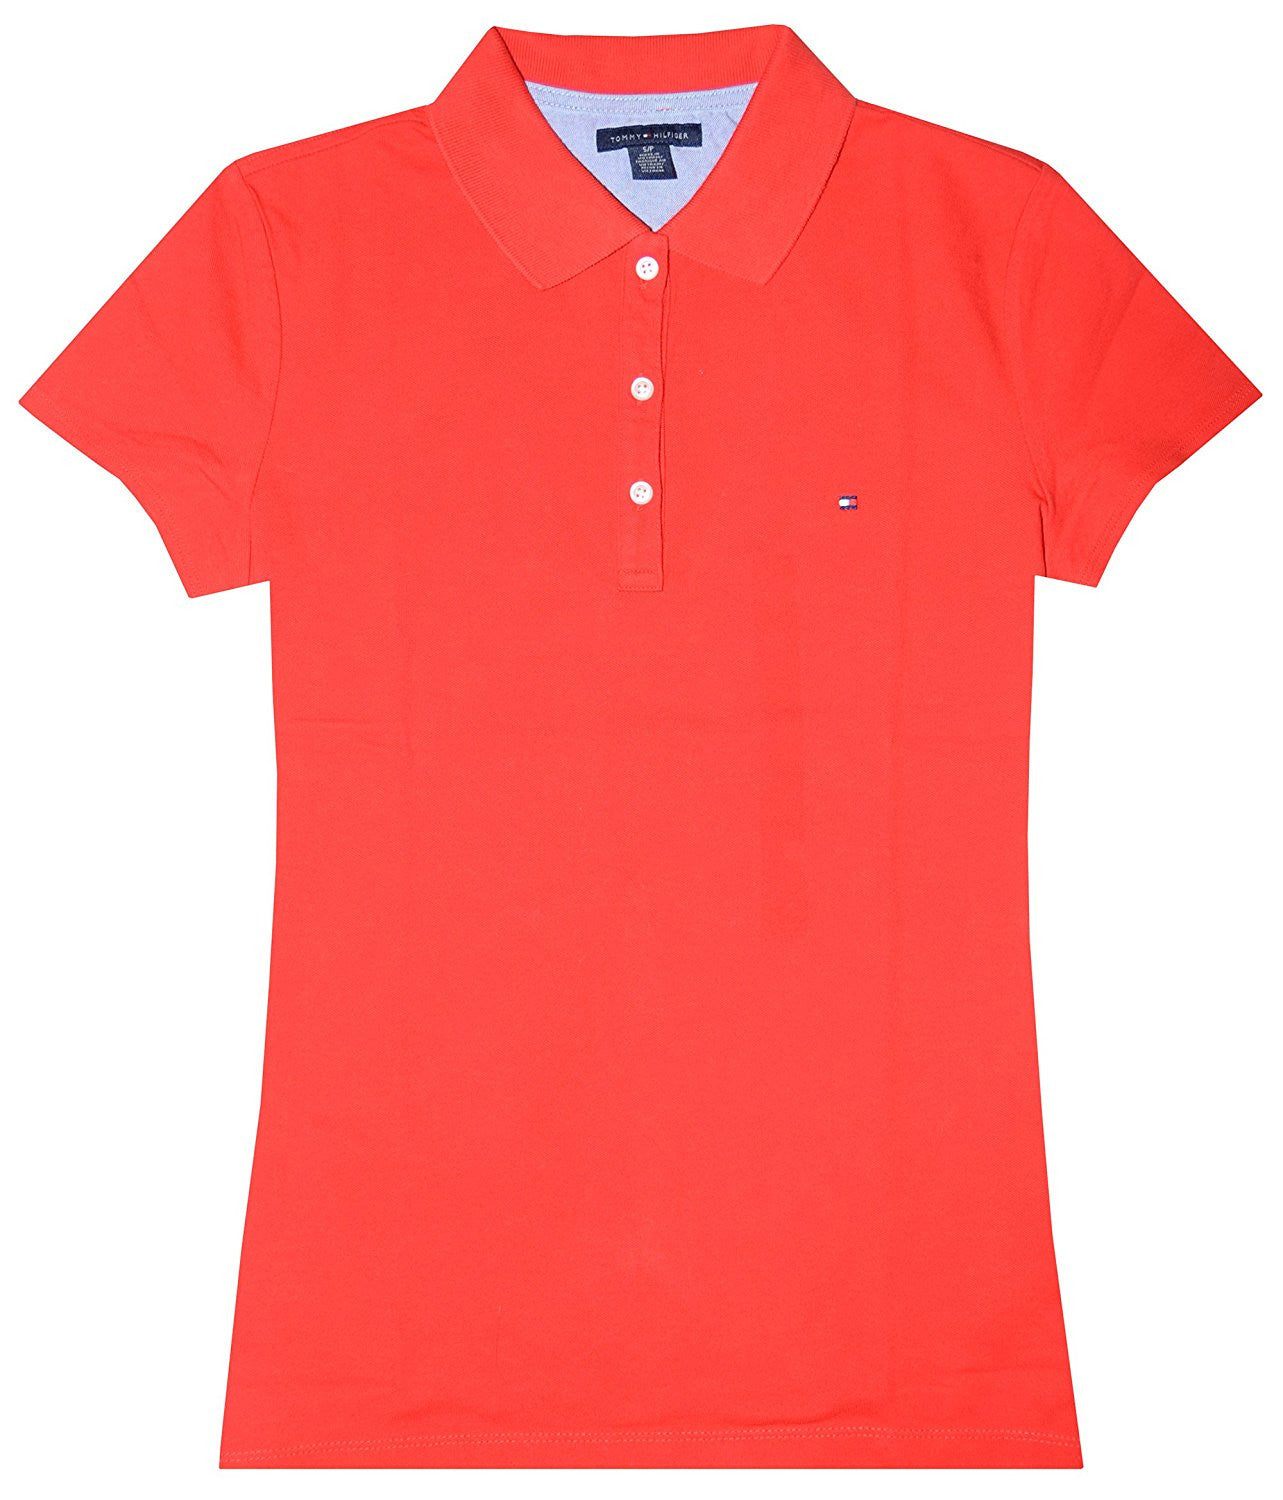 Buy tommy polo shirt - 59% OFF!